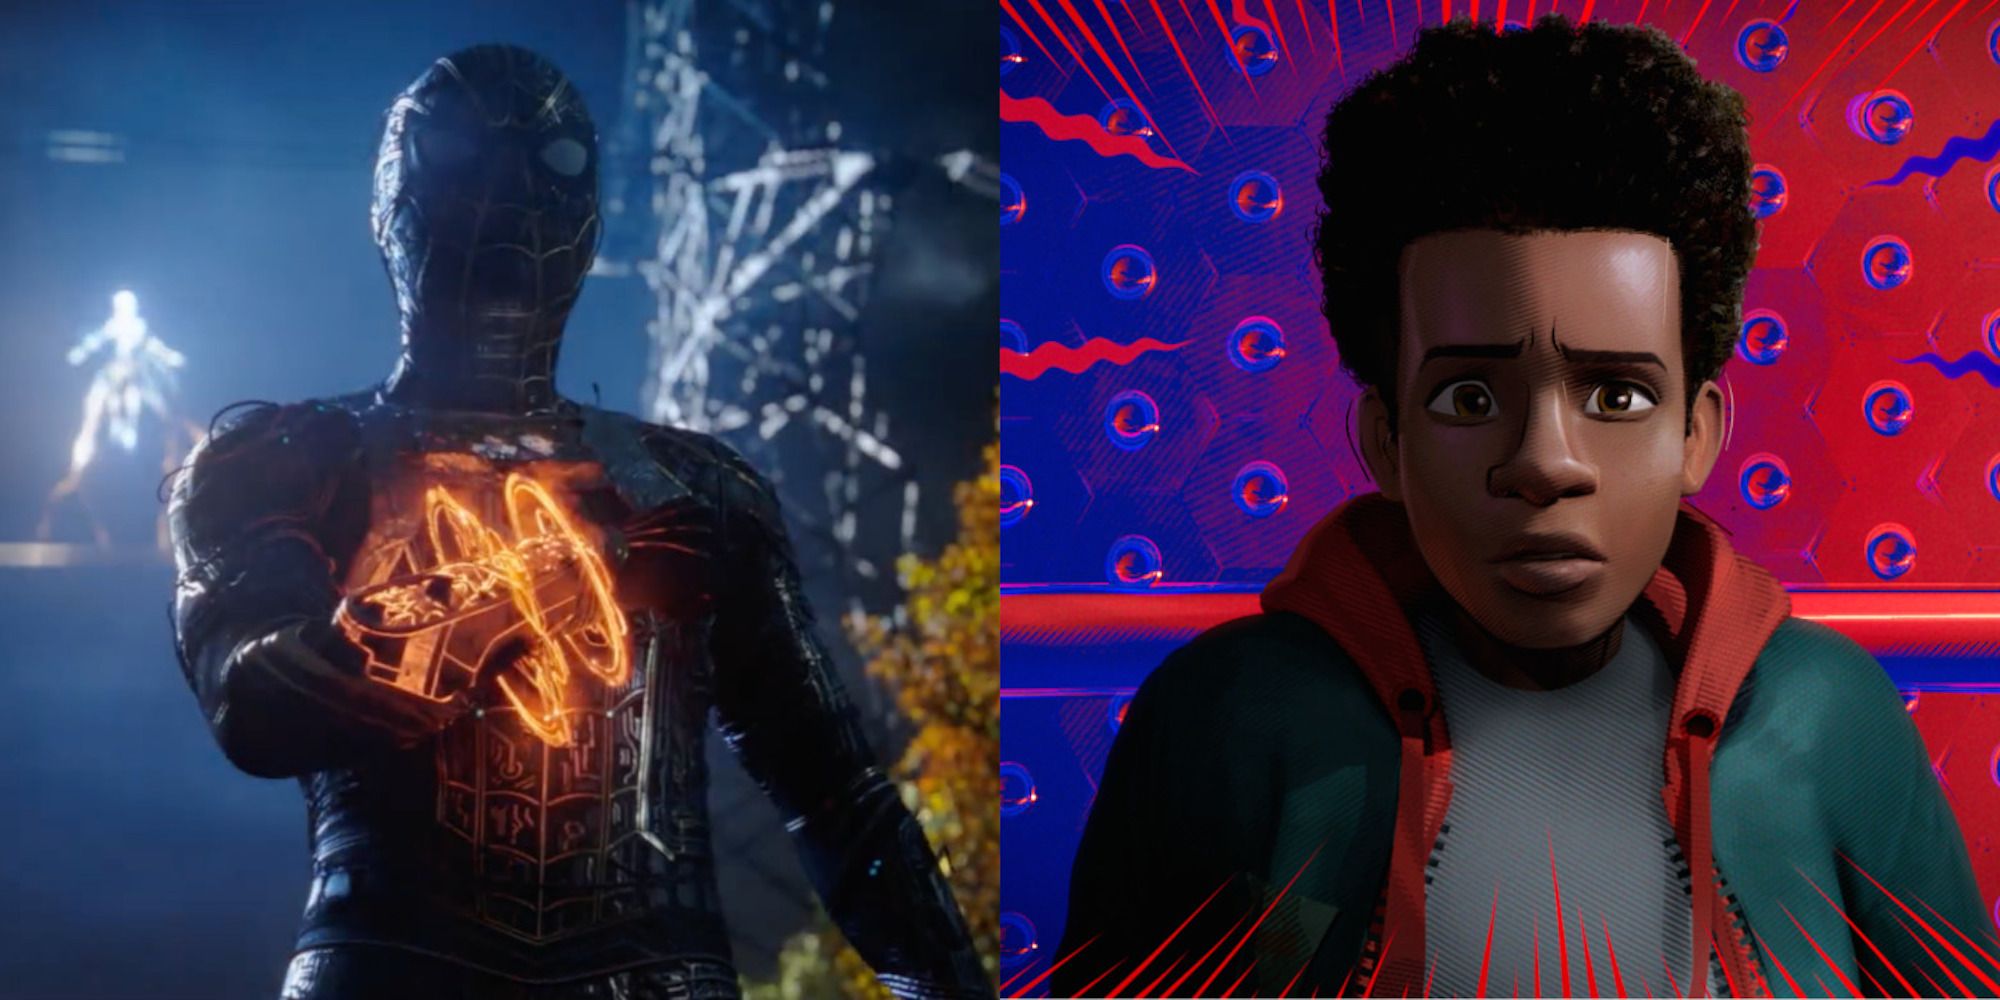 Peter from Spider-Man: No Way Home and and Miles from Into The Spider-Verse